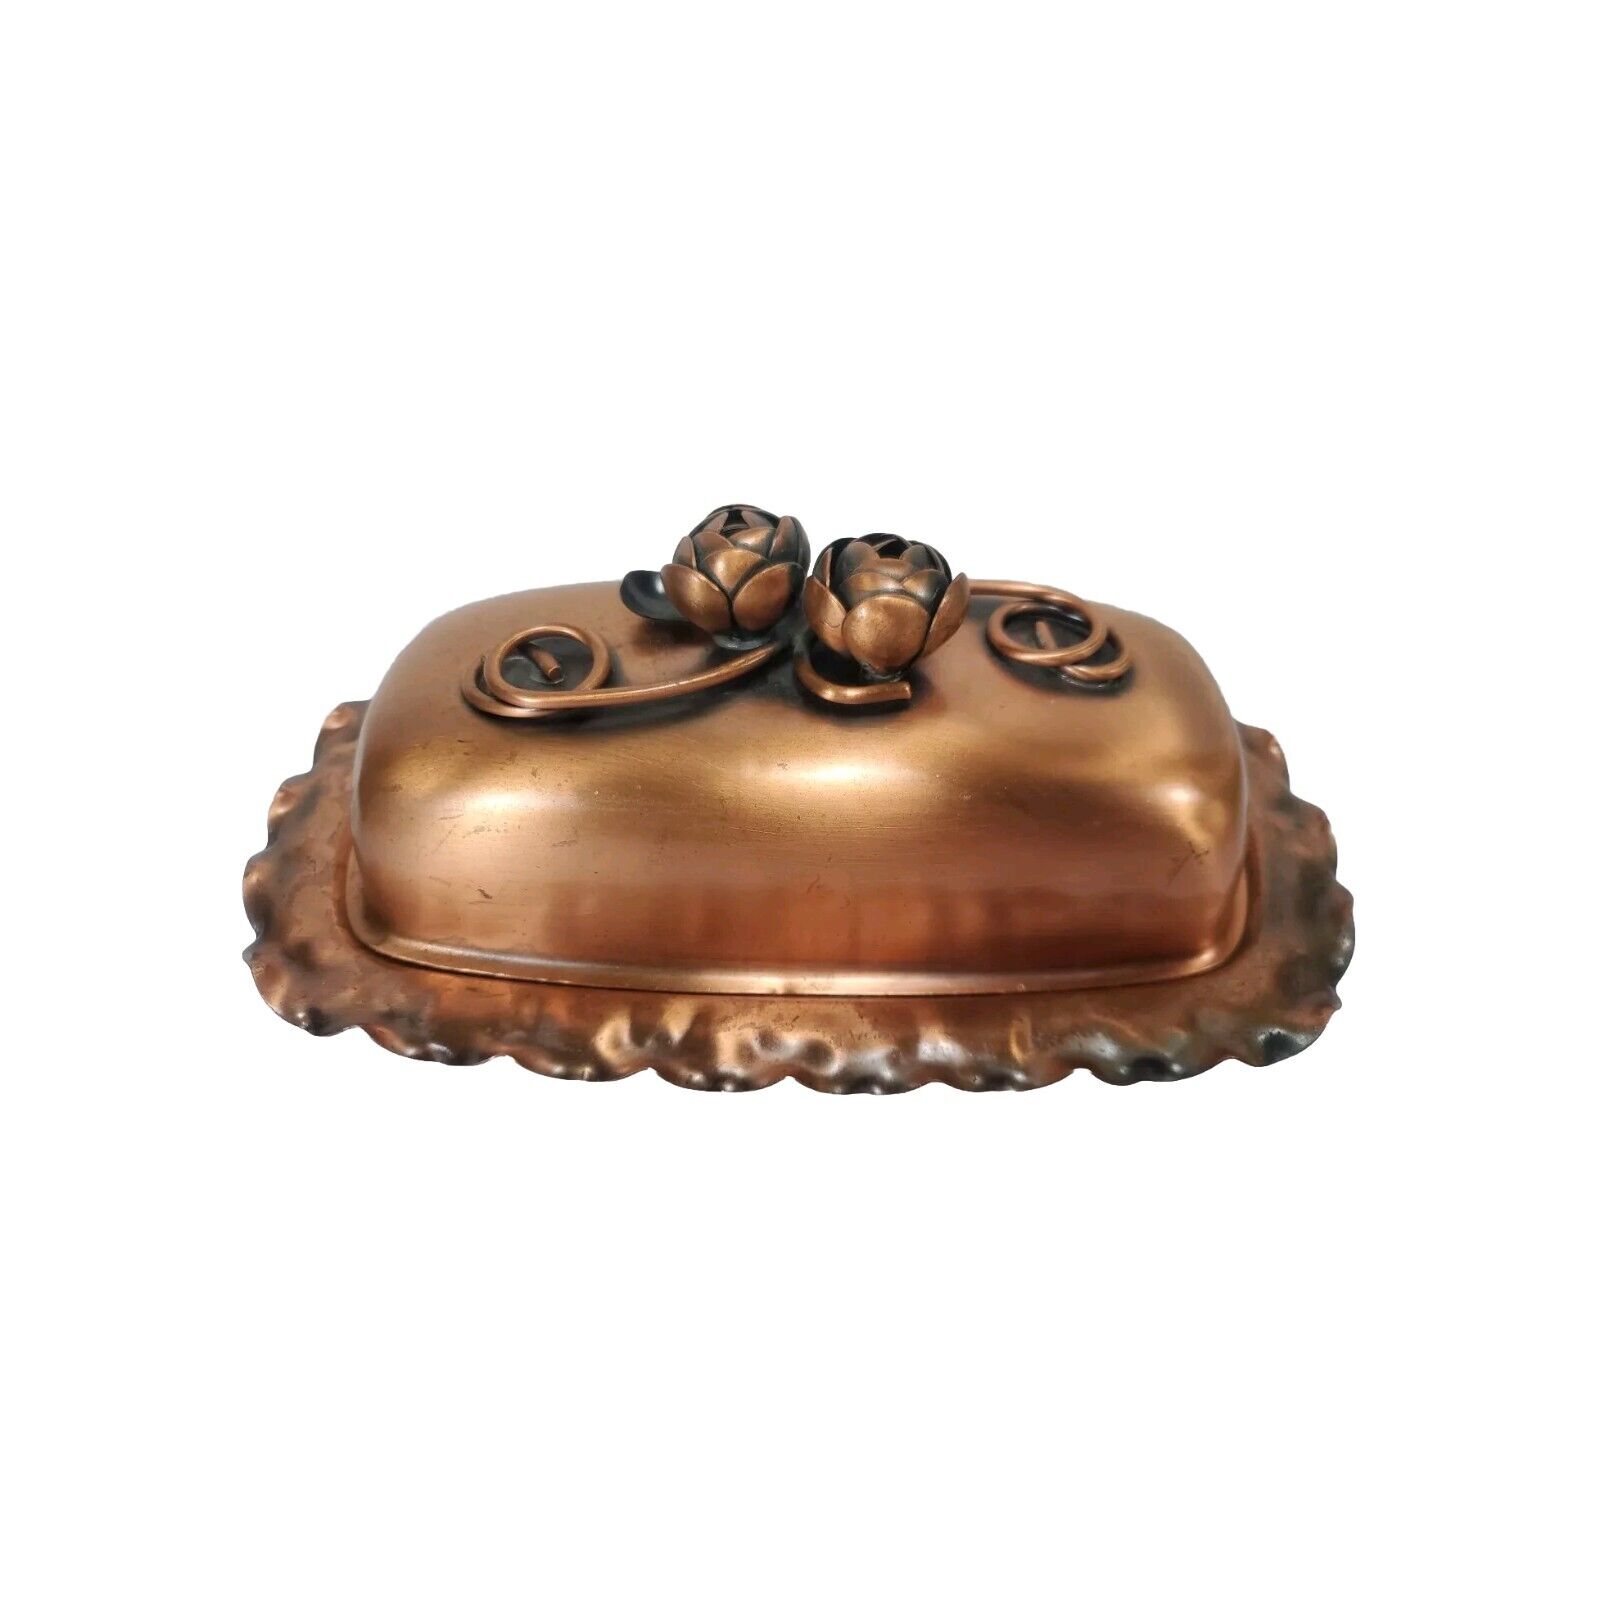 Gregorian Solid Copper Butter Dish Rose Flower Floral Lid Ruffle Edge NO INSERT